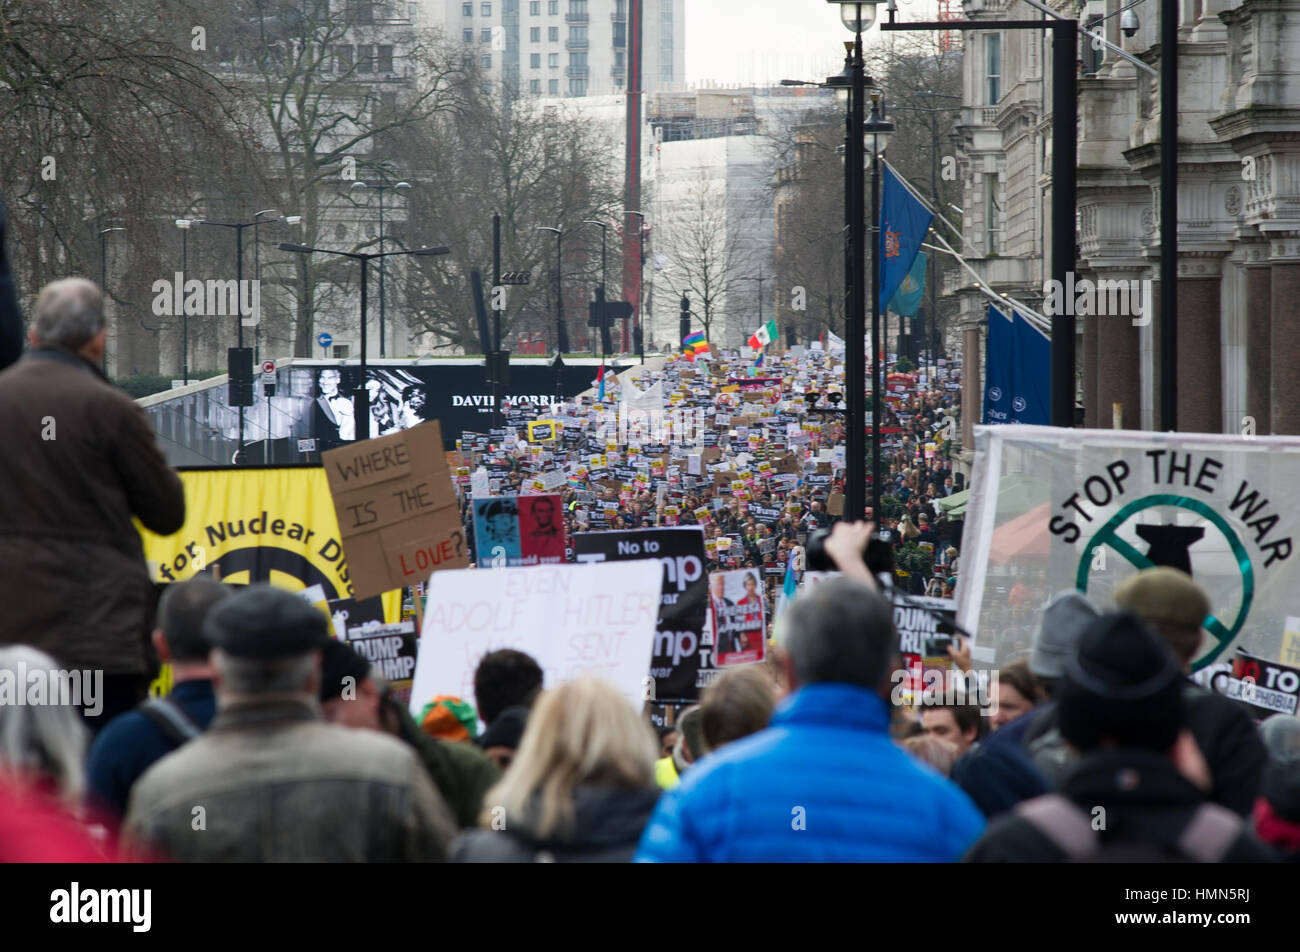 London, England, UK.  4th February 2017. Several people marched through London in protest against the president of the United States Donald Trump’s refugee ban. Andrew Steven Graham/Alamy Live News Stock Photo